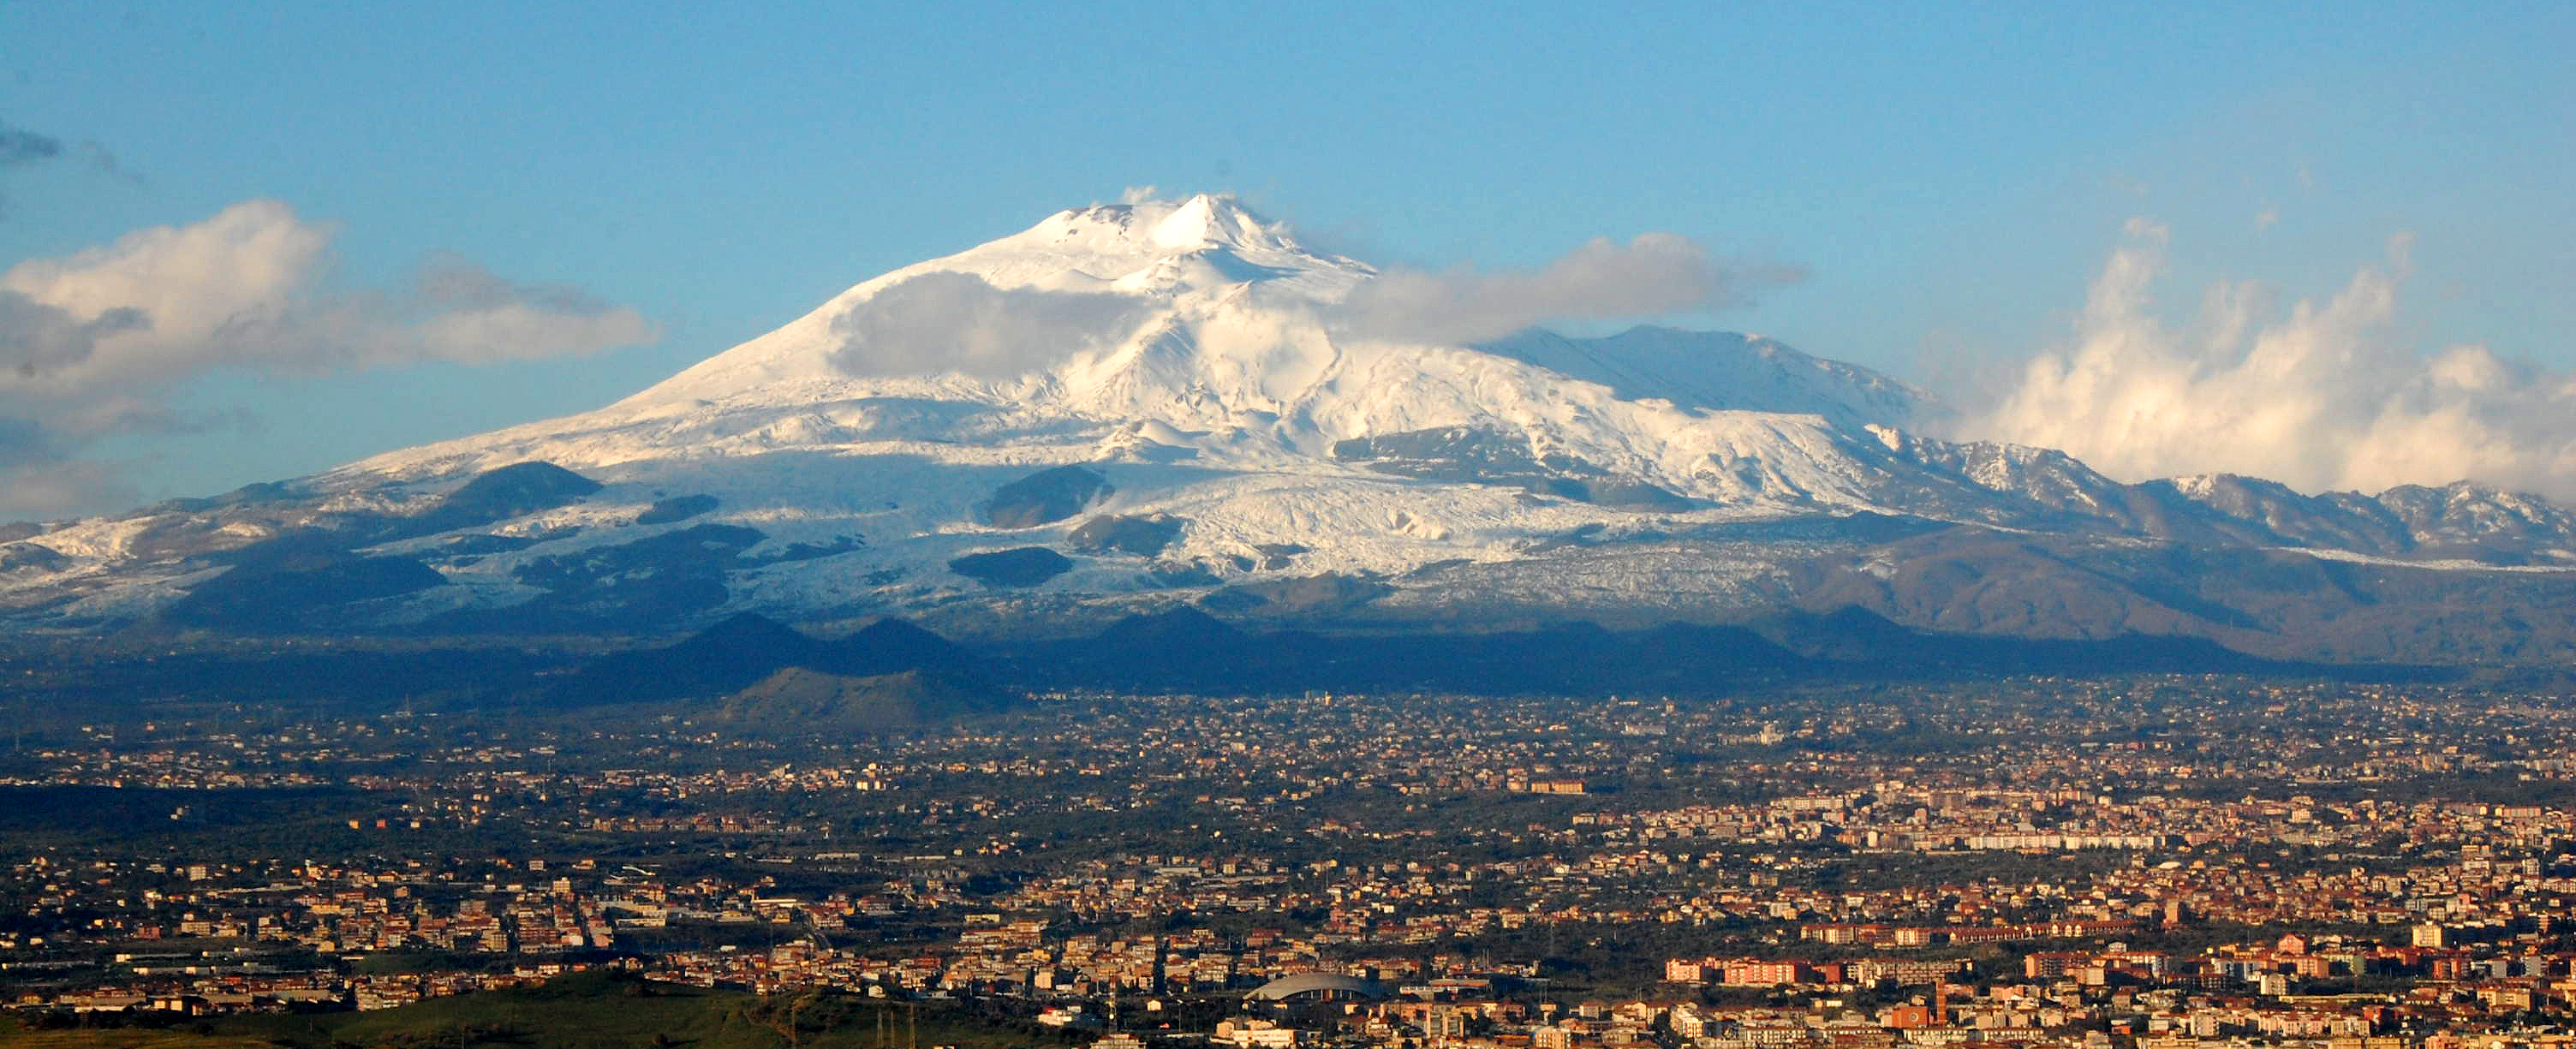 File:Mt Etna and Catania1.jpg - Wikimedia Commons